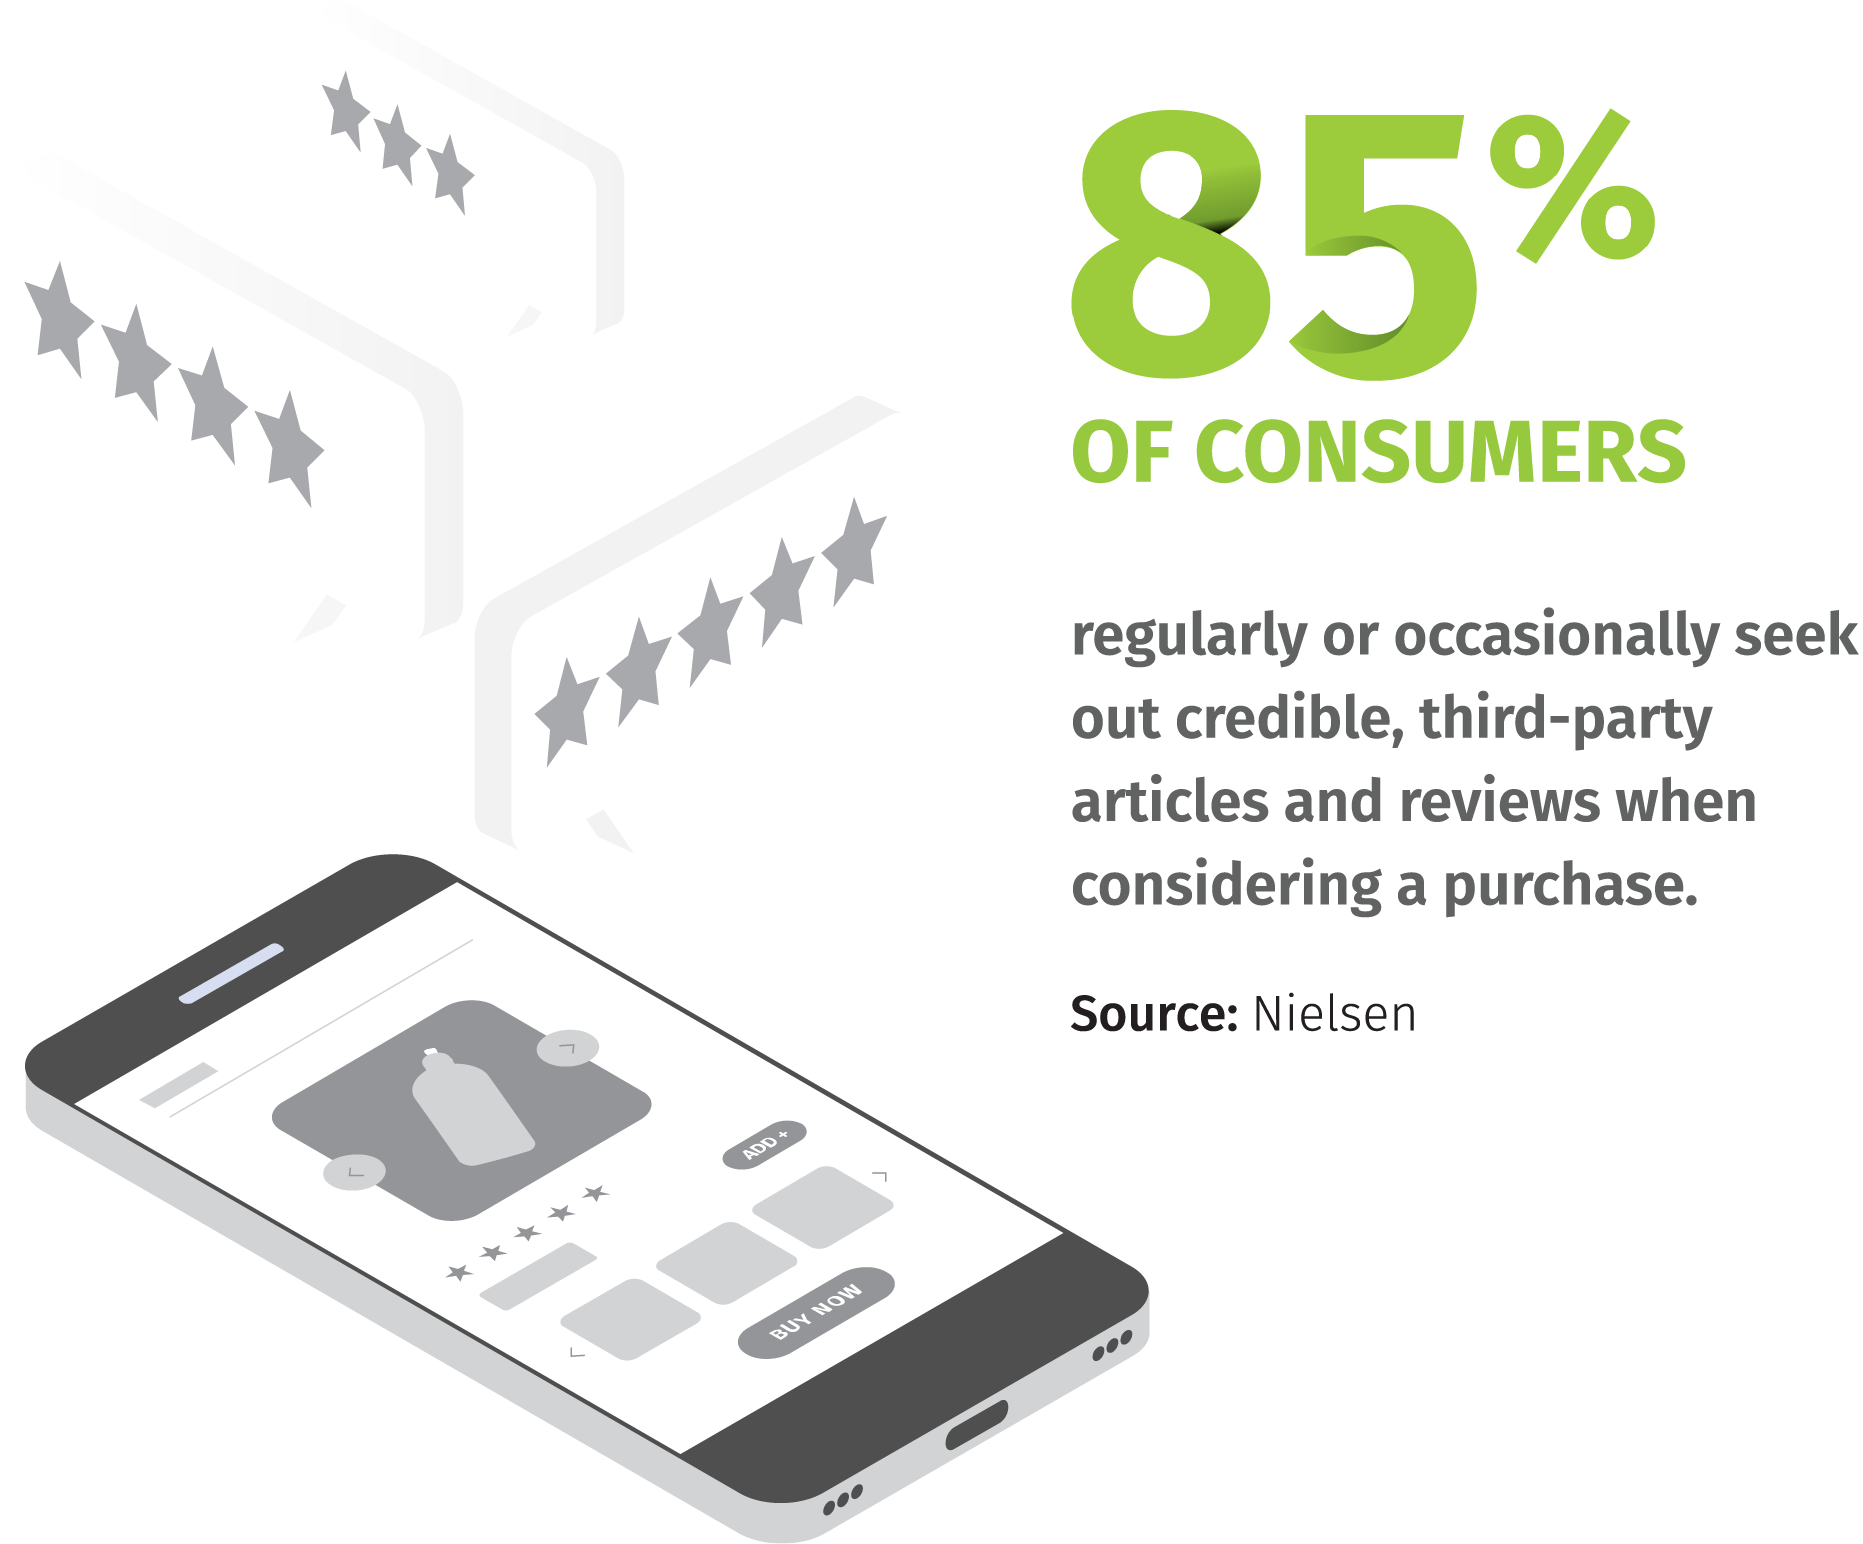 85% of consumers regularly or occasionally seek out credible, third-party articles and reviews when considering a purchase. Source: Nielsen